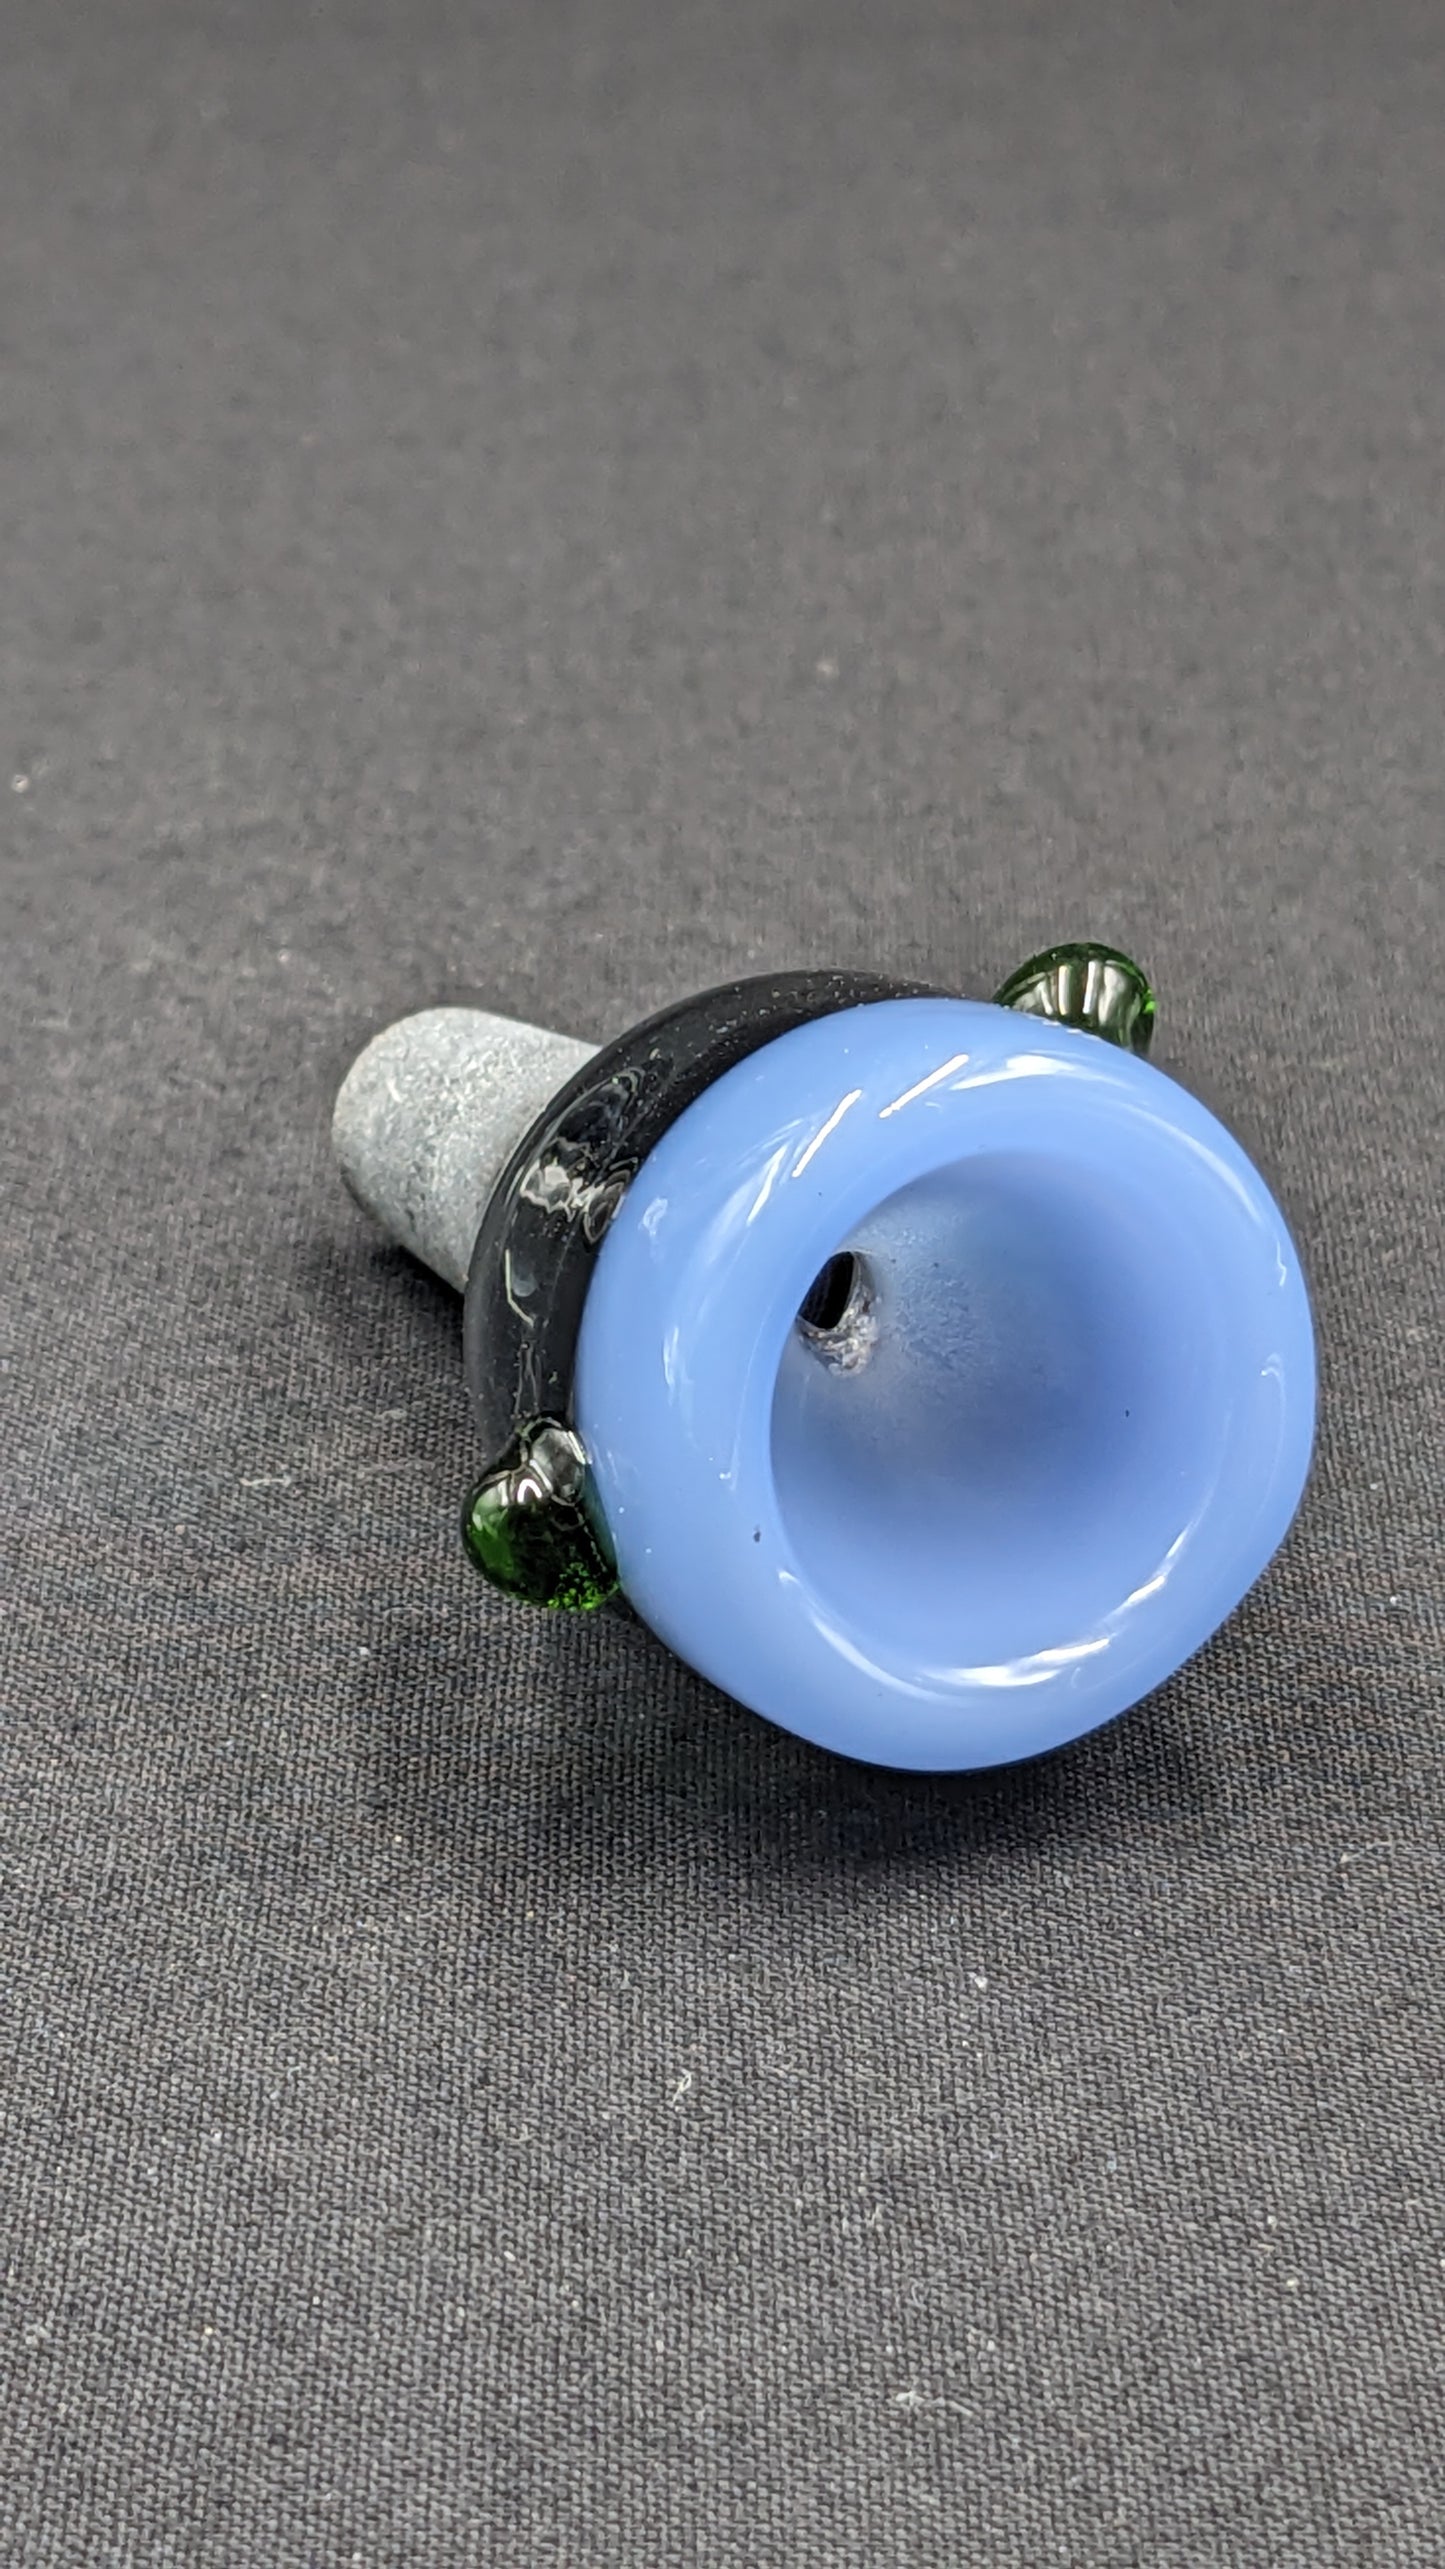 14mm Male Slide Bowl Glass for Water Pipes - BW06 Light Blue Mix